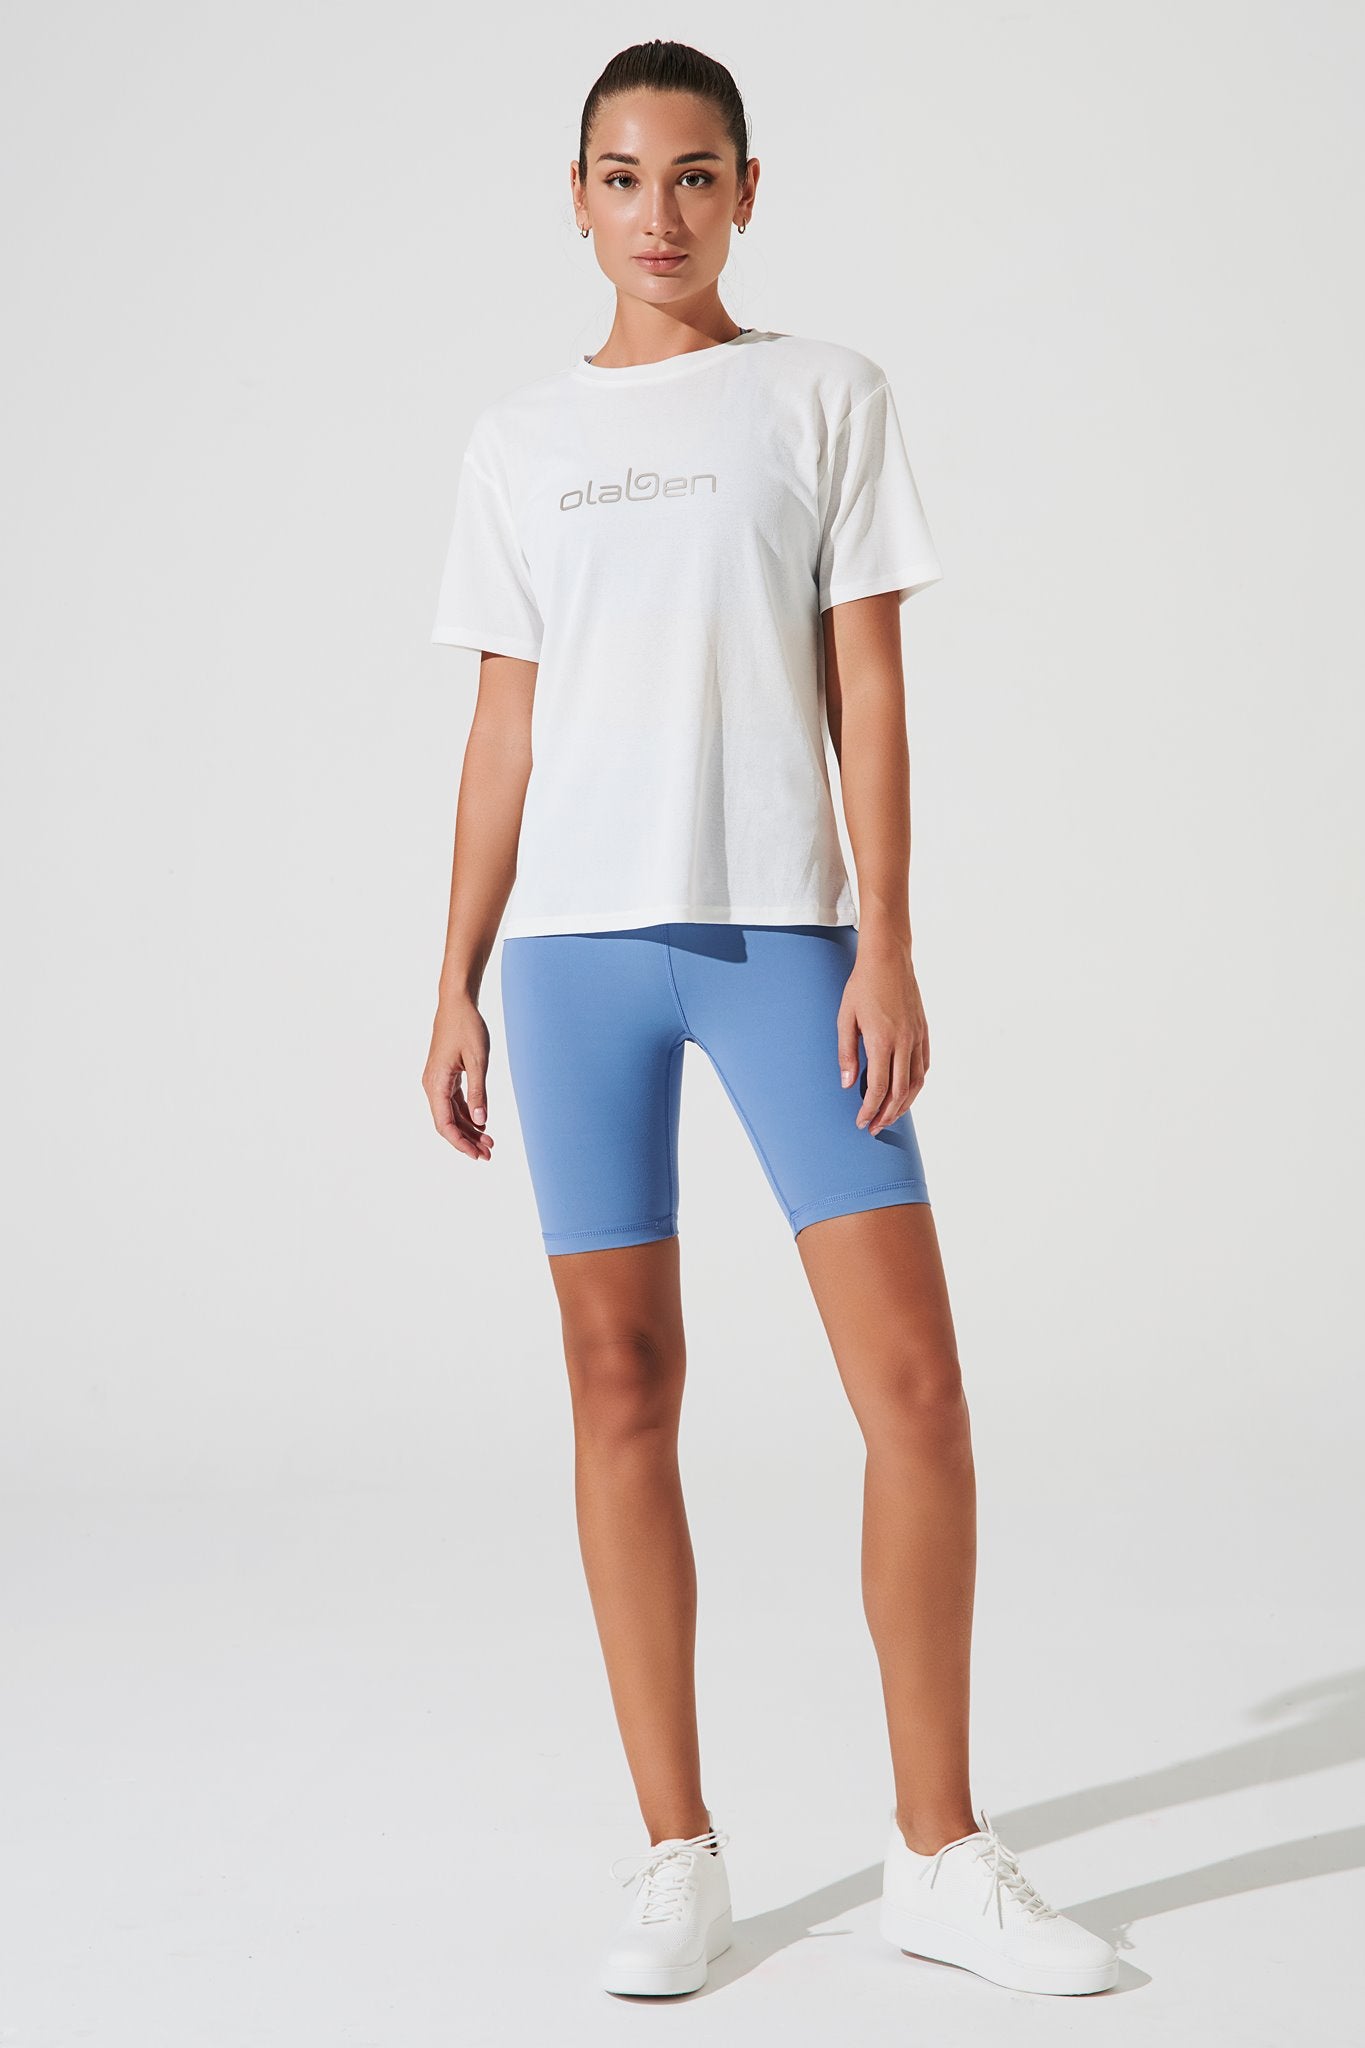 White women's short sleeve athletic tee with OLABEN logo - OW-0110-WSS-WT - front view.